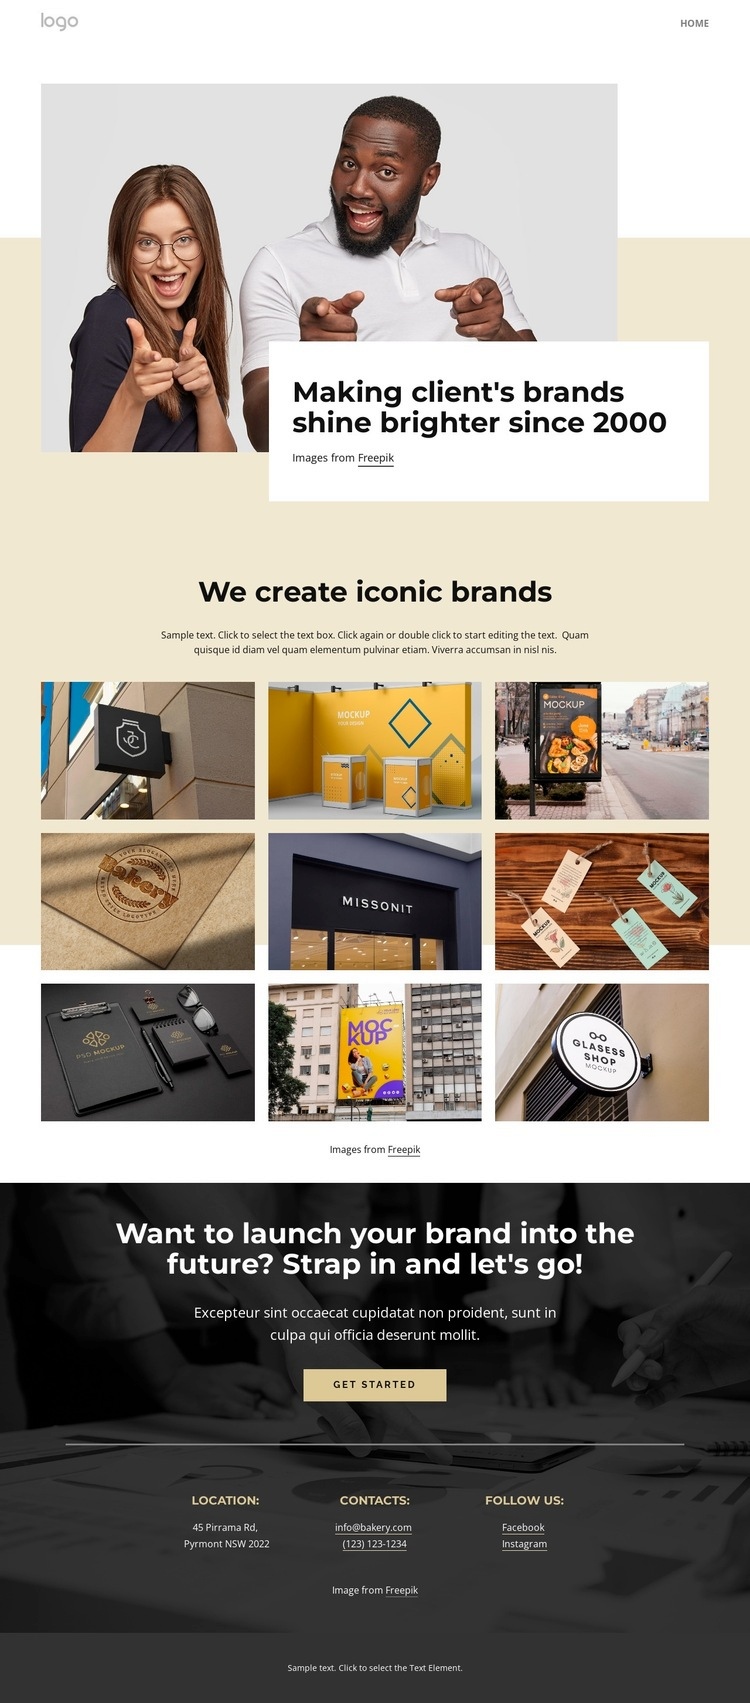 We create iconic brands Homepage Design